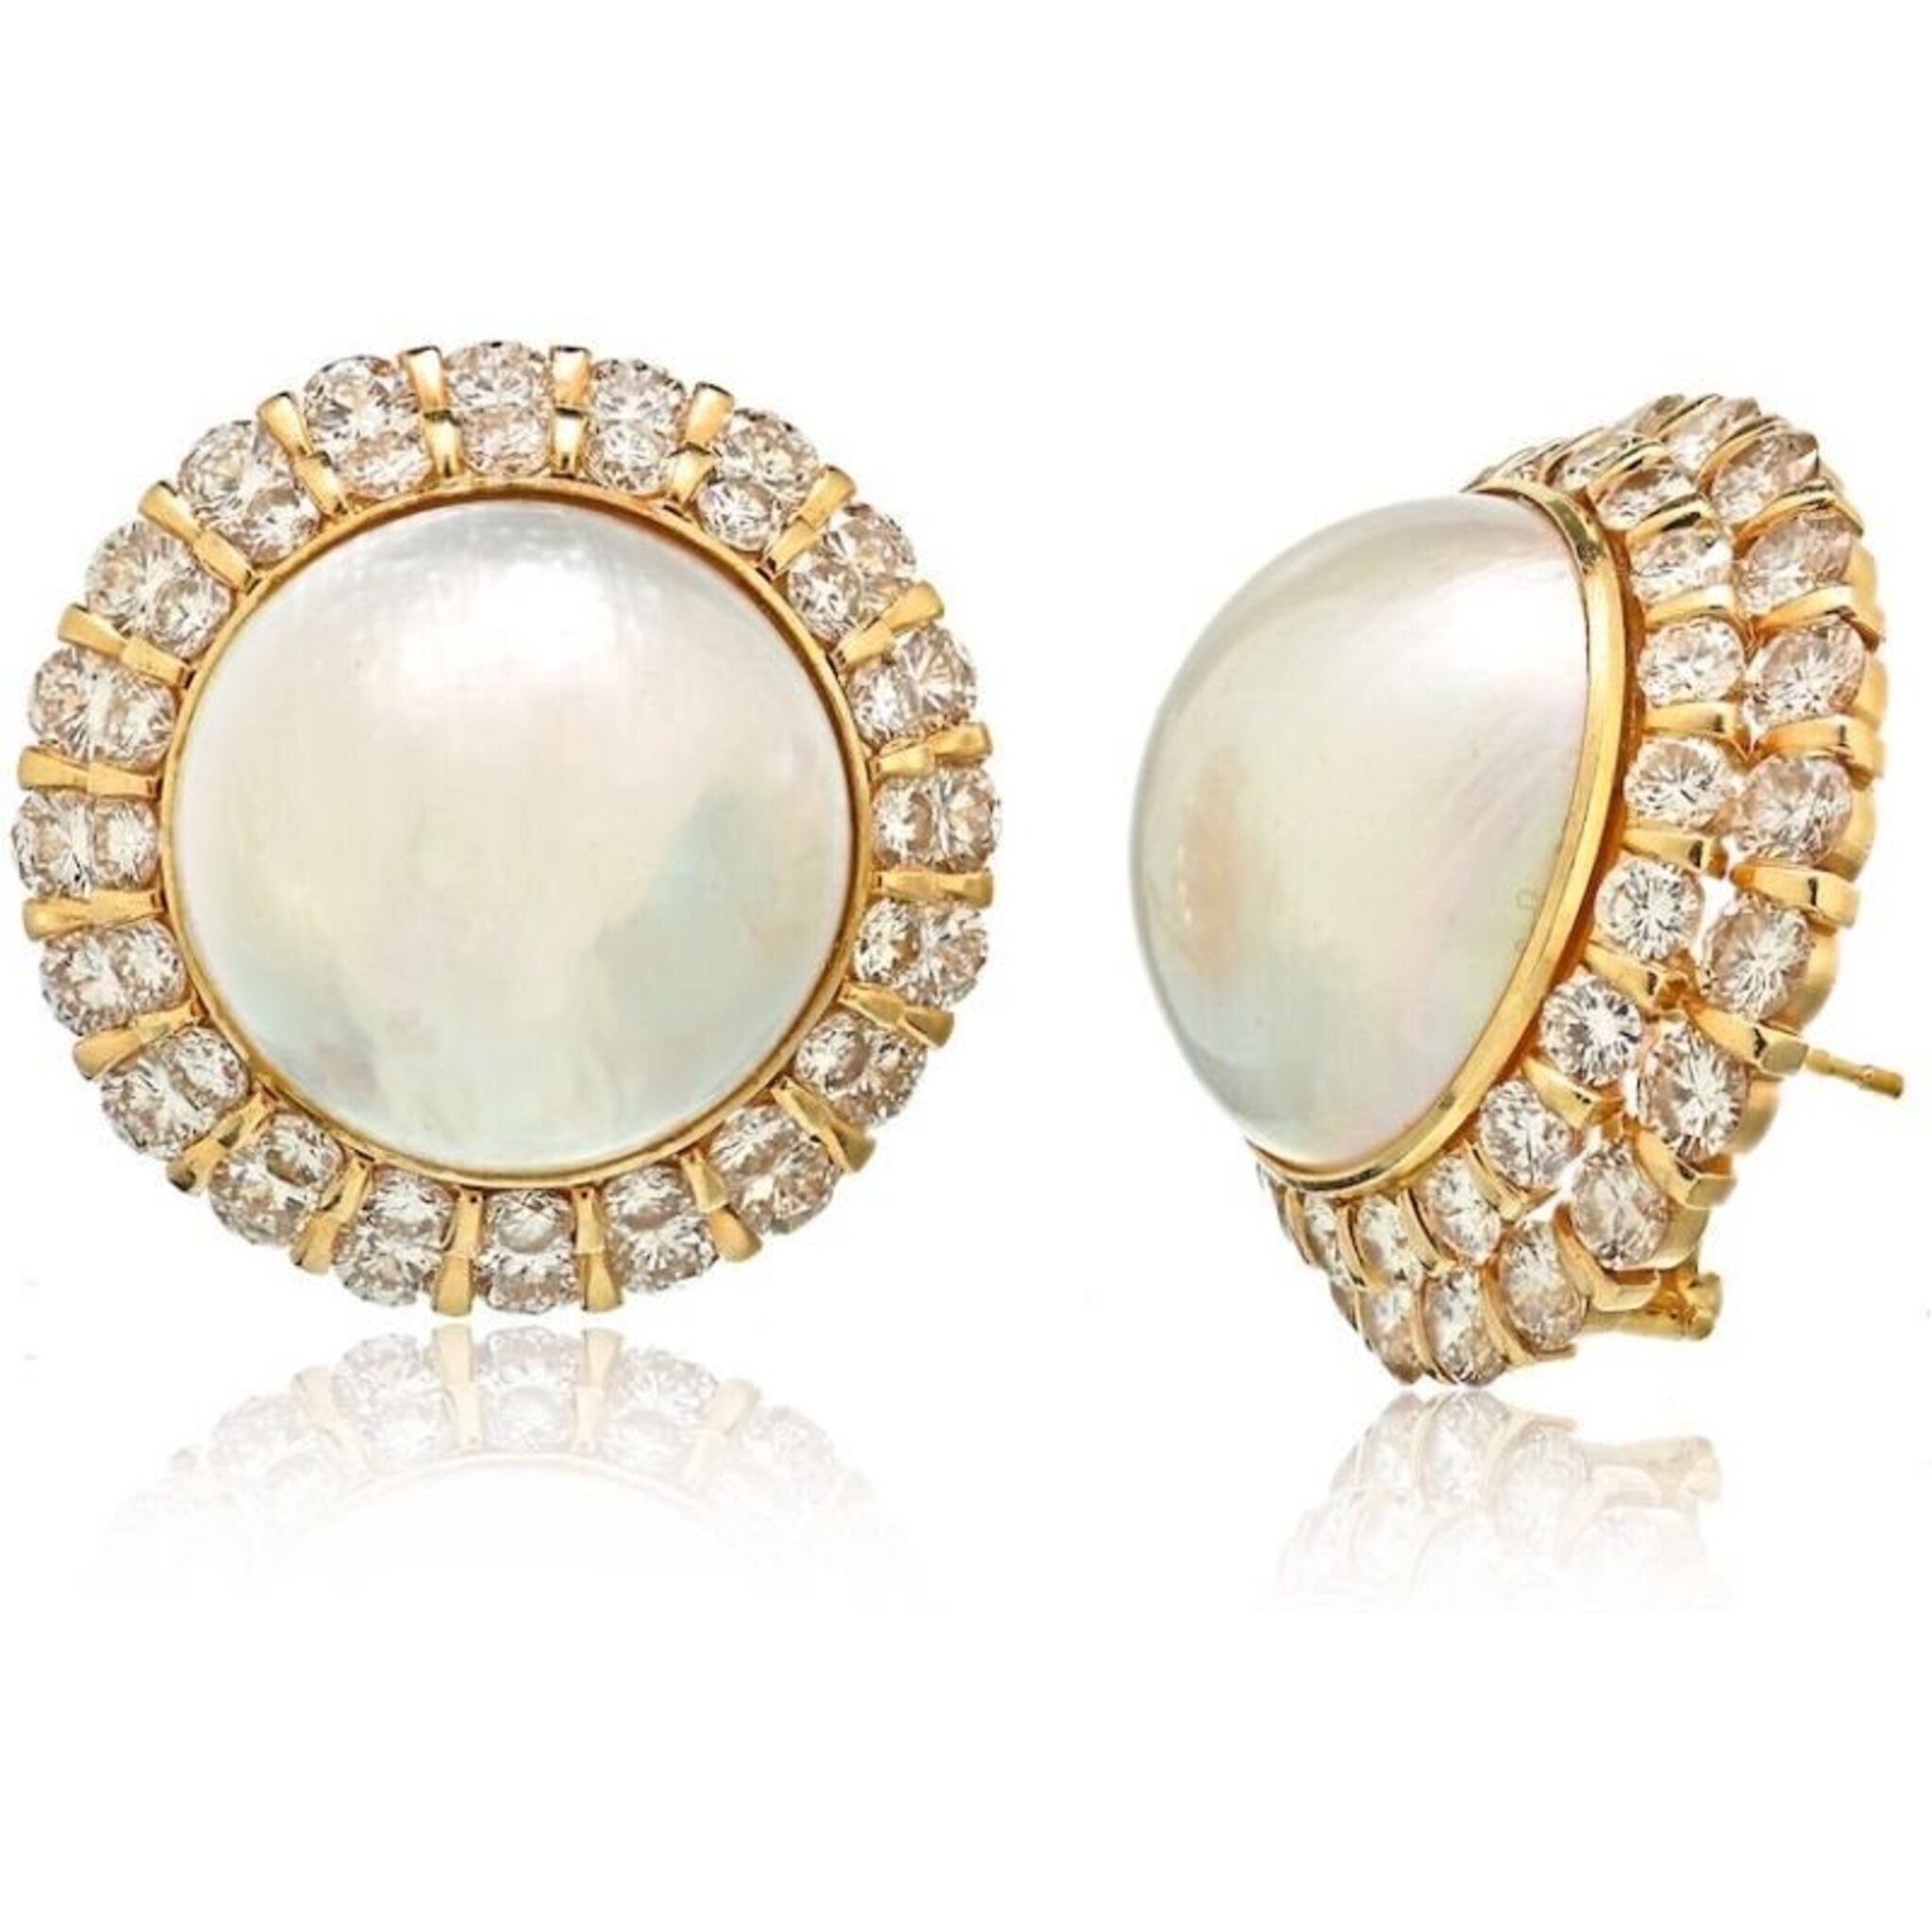 14K Yellow Gold Mabe Pearl and Diamonds Earrings